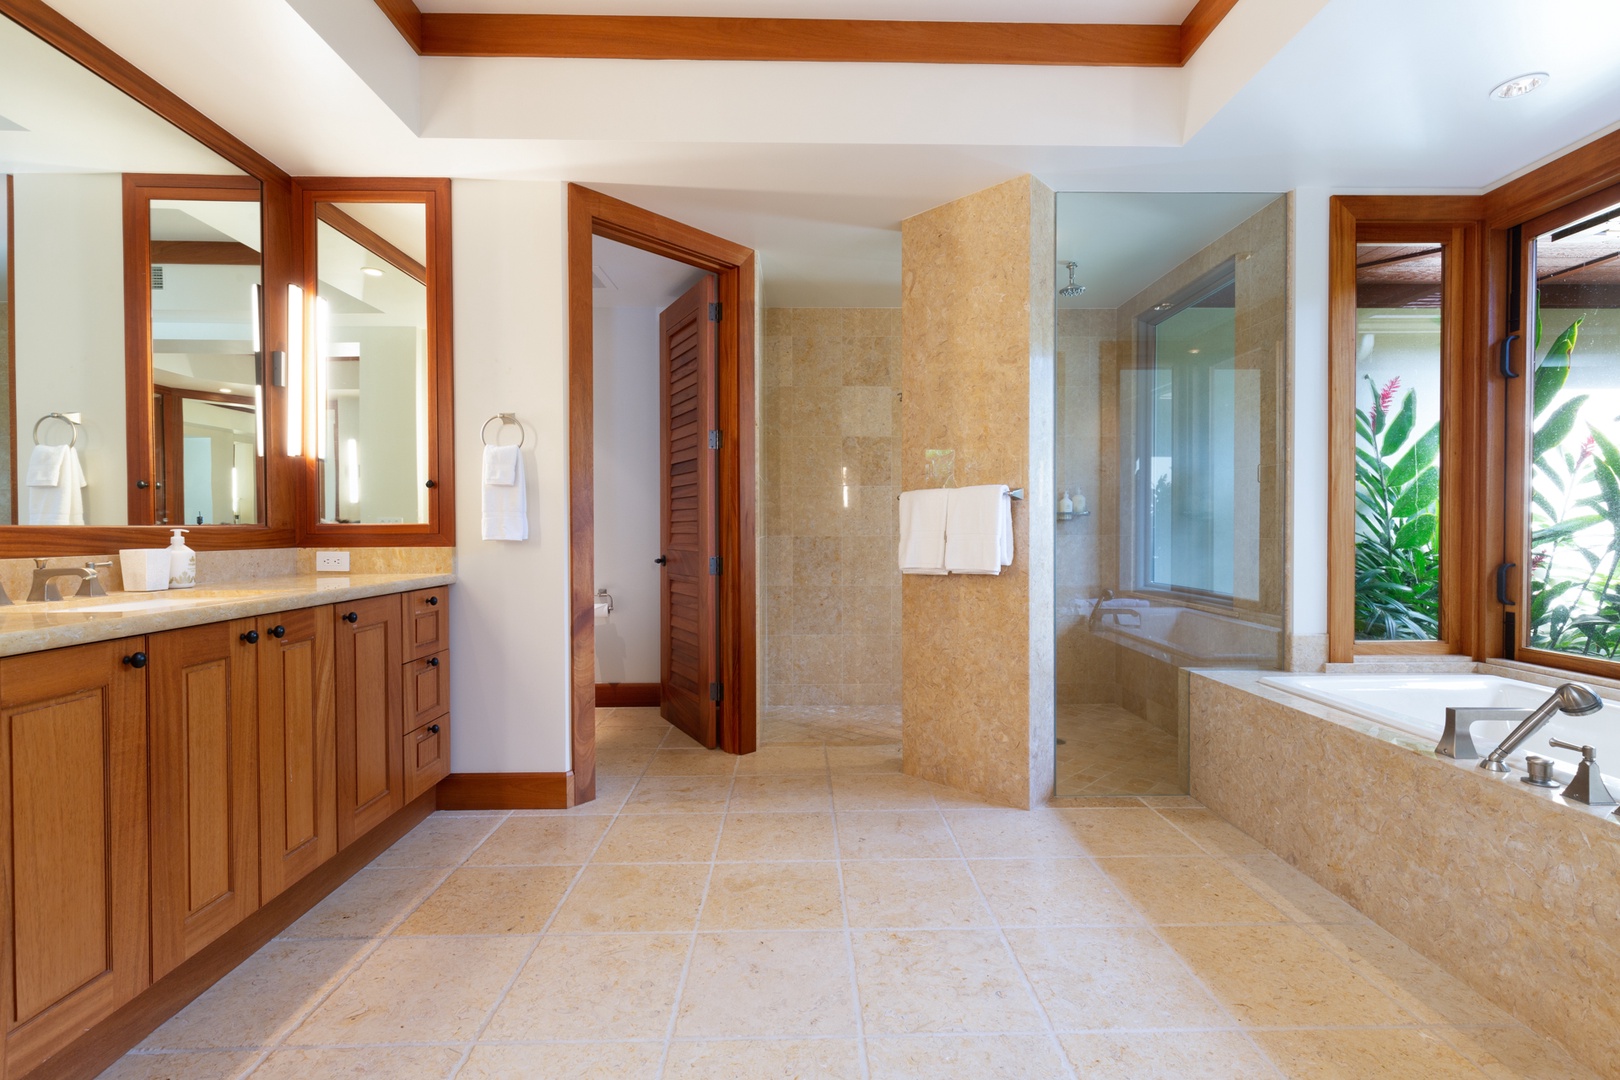 Kailua Kona Vacation Rentals, 4BD Hainoa Estate (102) at Four Seasons Resort at Hualalai - Reverse view of the primary bathroom showcasing the walk-in shower & private w/c